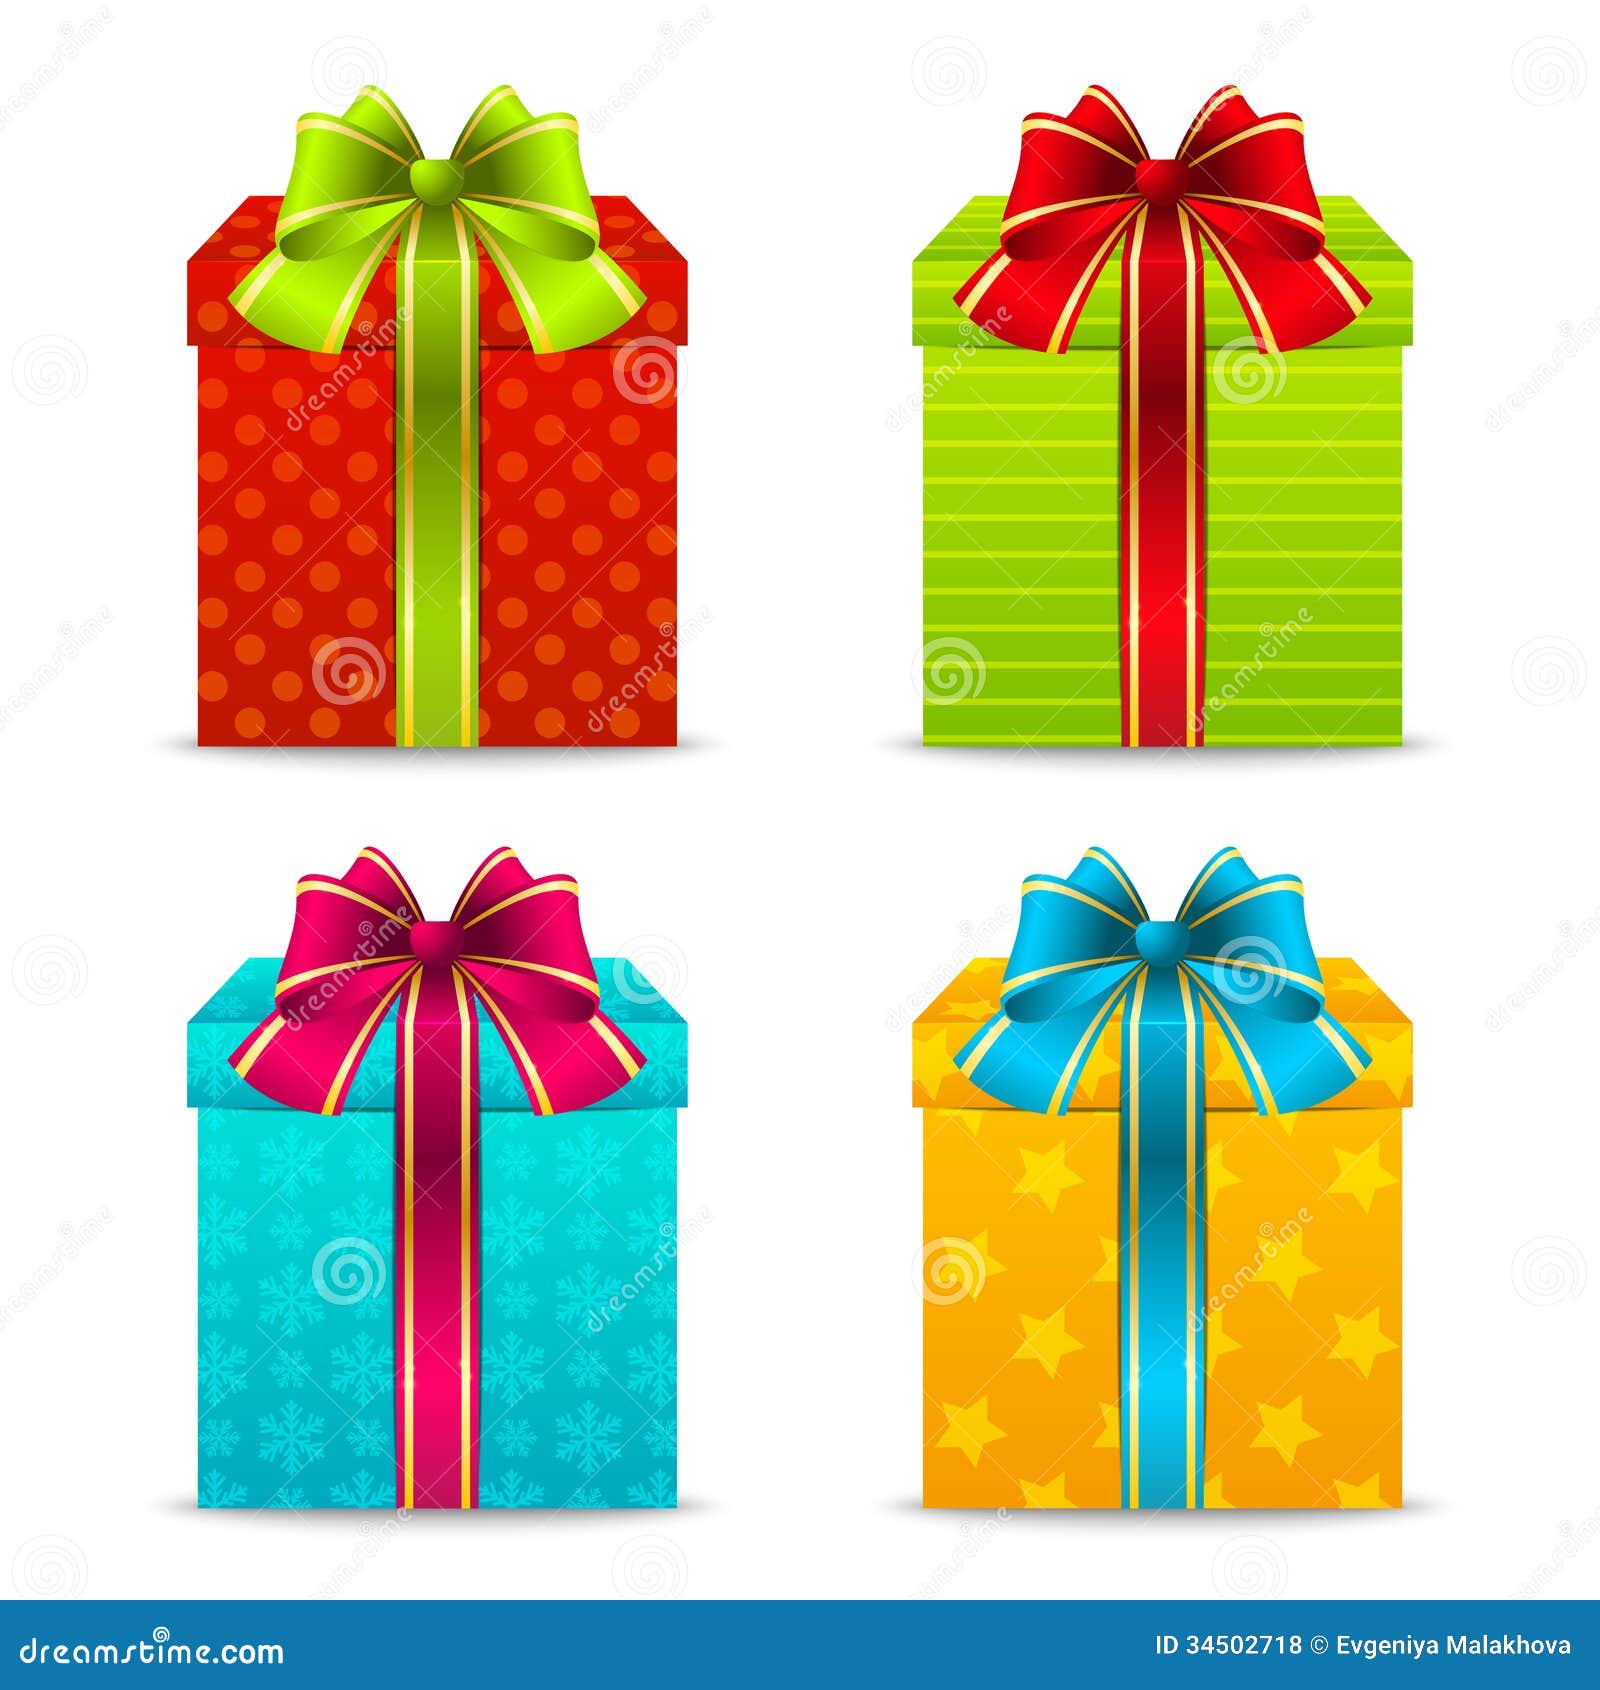 free clipart christmas gift boxes - photo #41